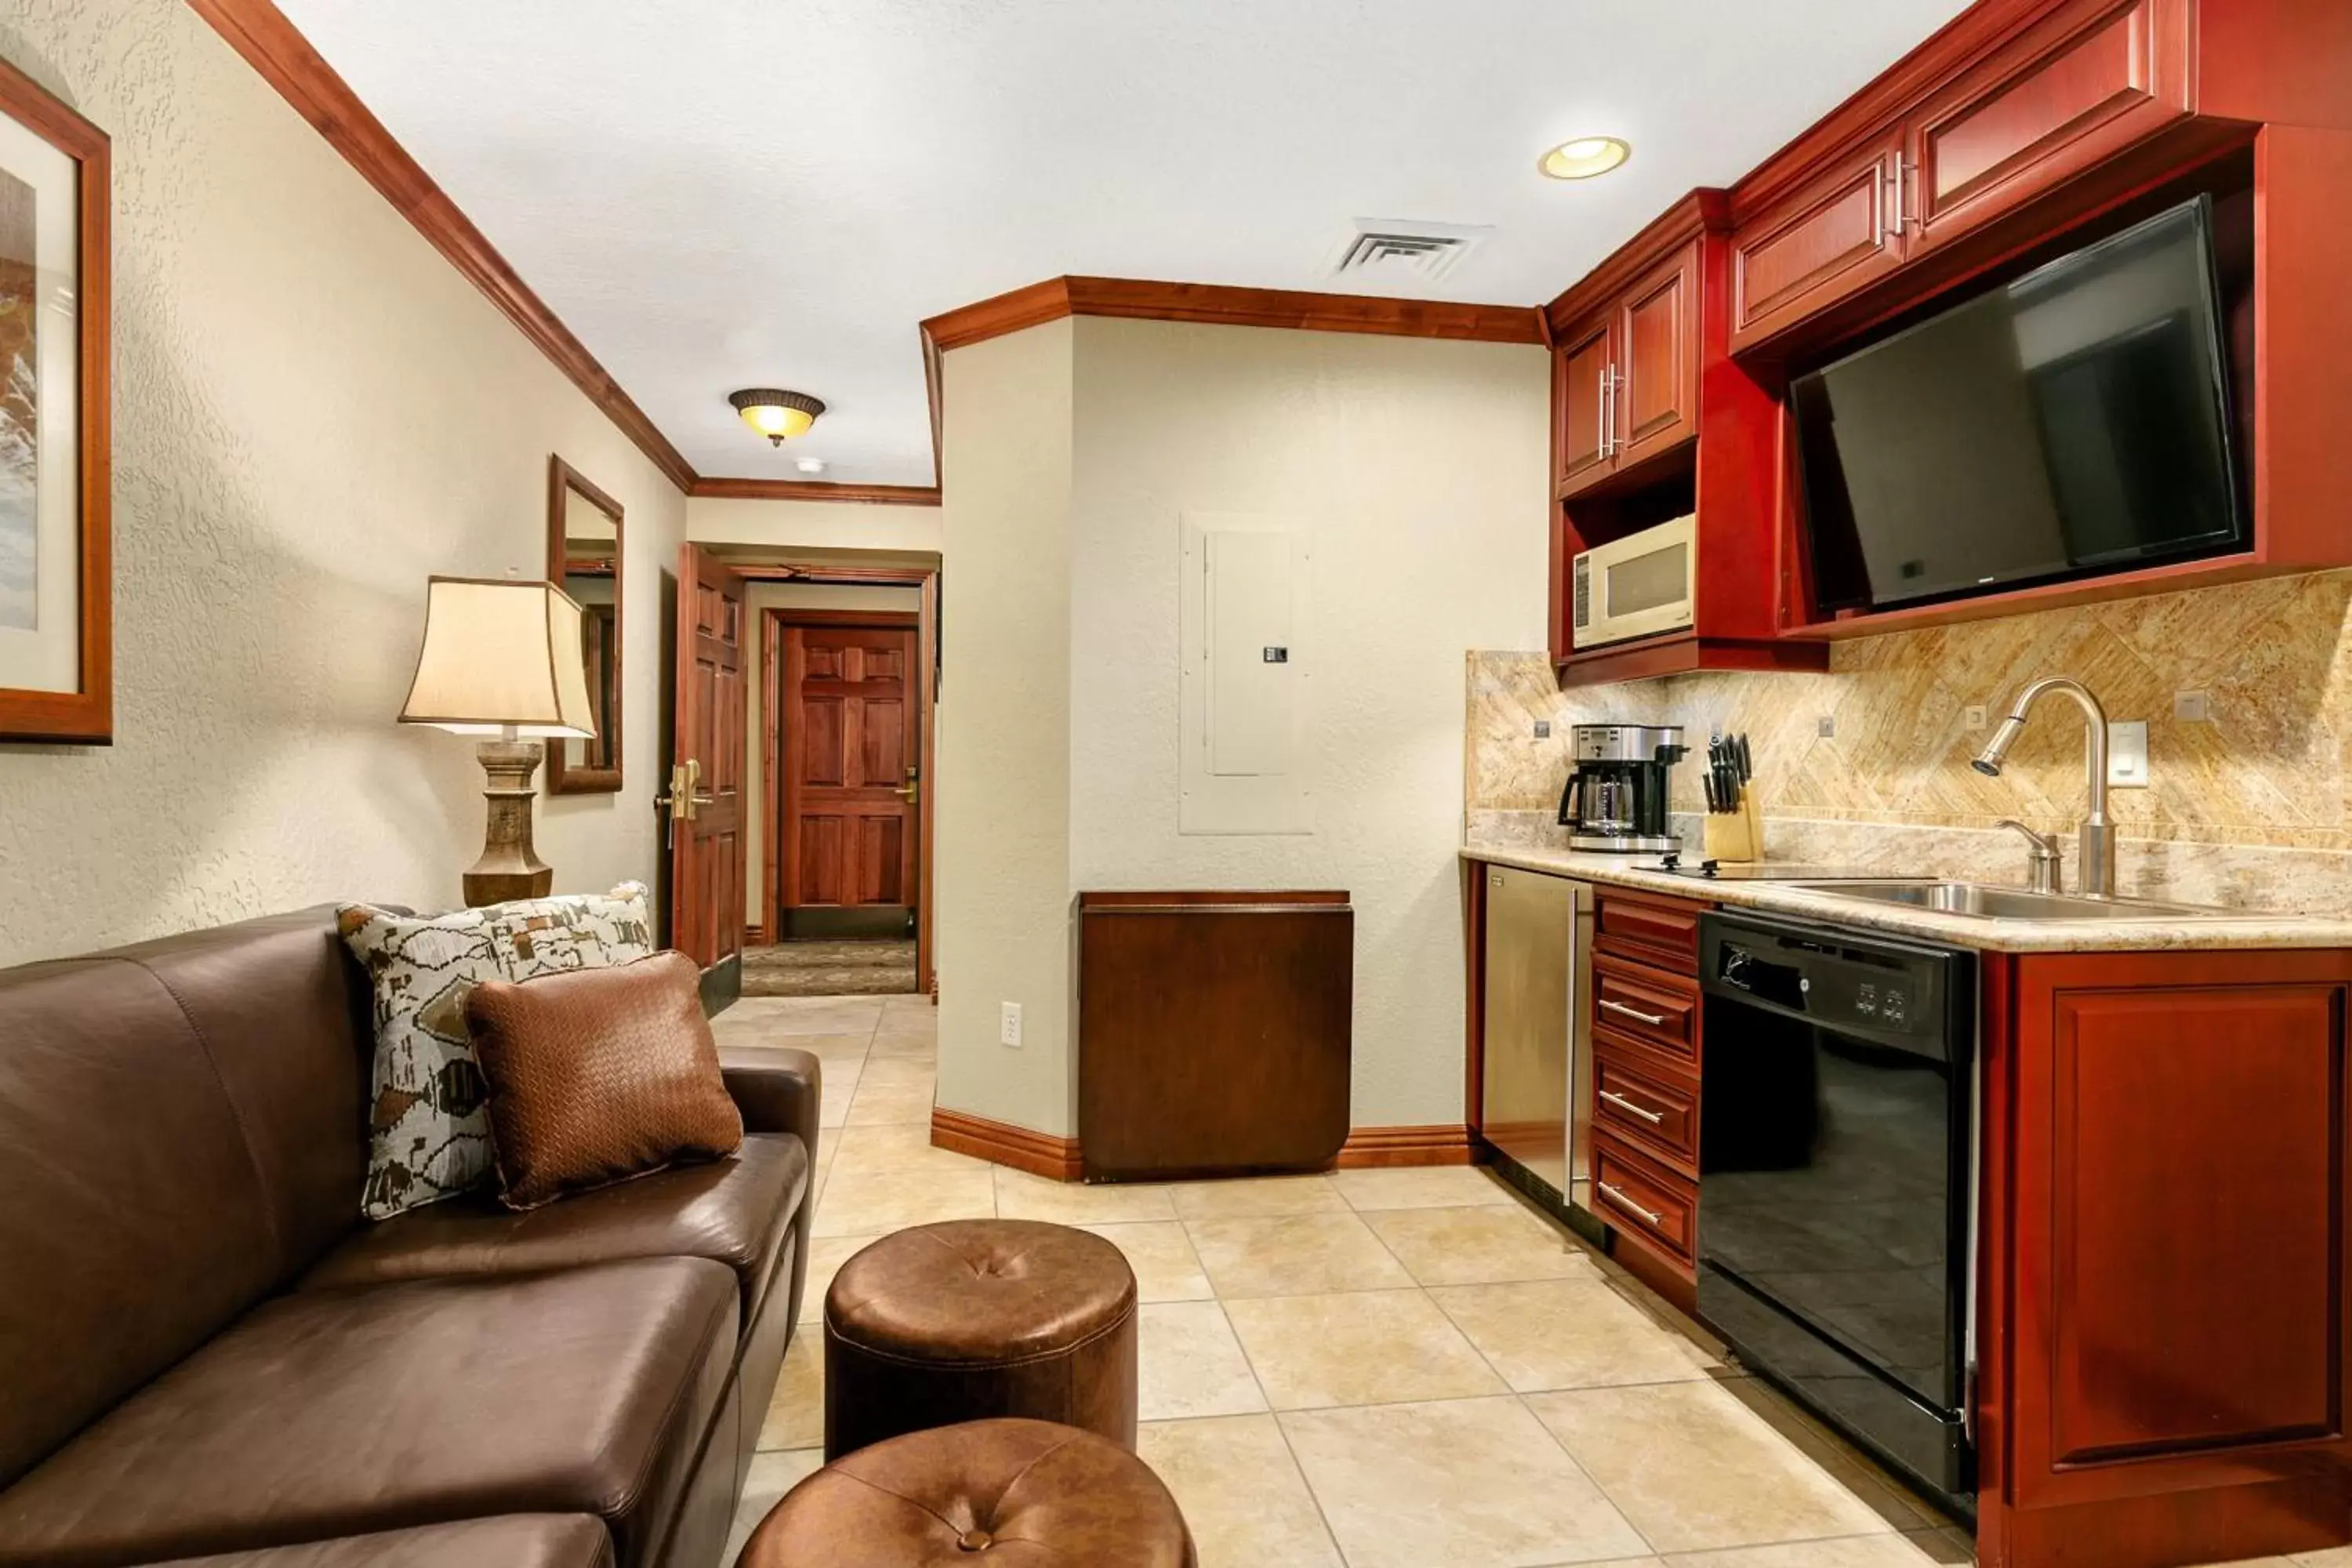 Kitchen/Kitchenette in Condos at Canyons Resort by White Pines